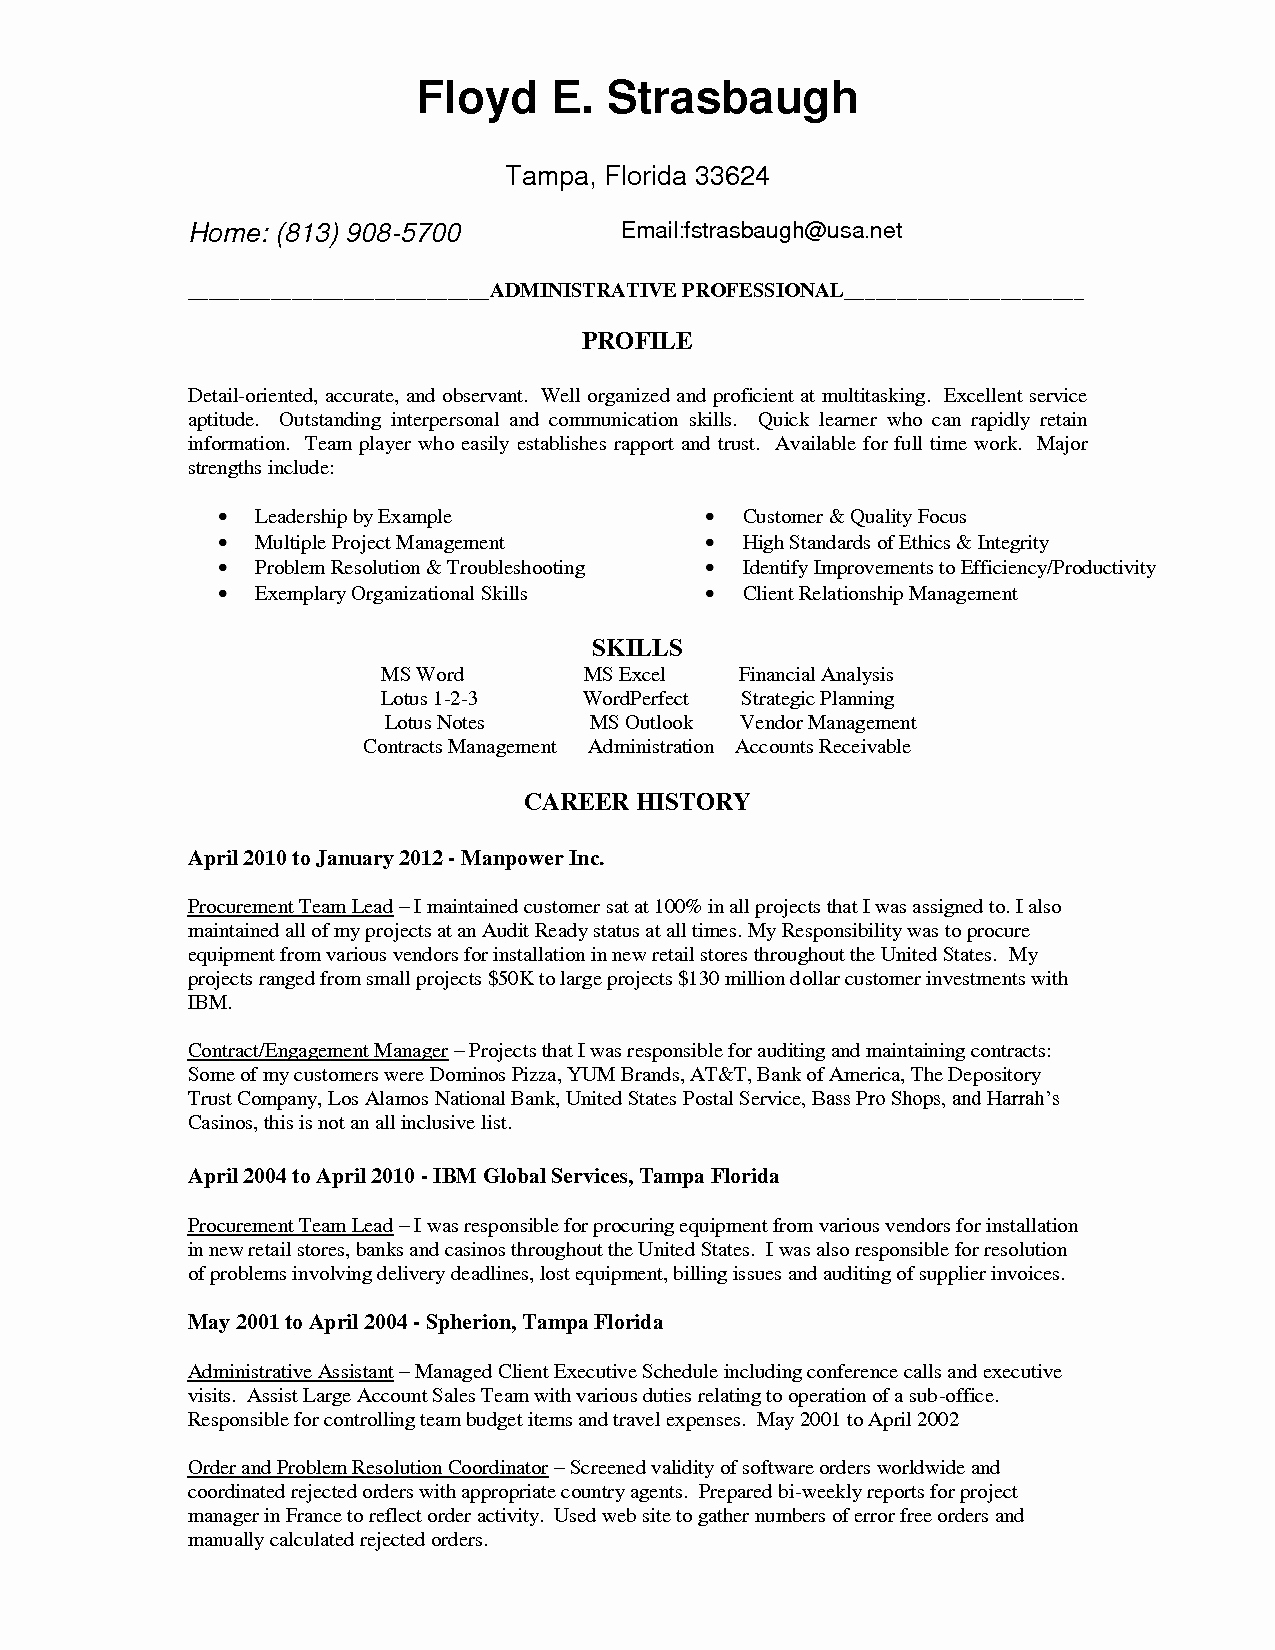 609 letter template free example-Sample Resume for Administrative Position Best English Letter Template Word Copy Od Specialist Cover Letter 12-q